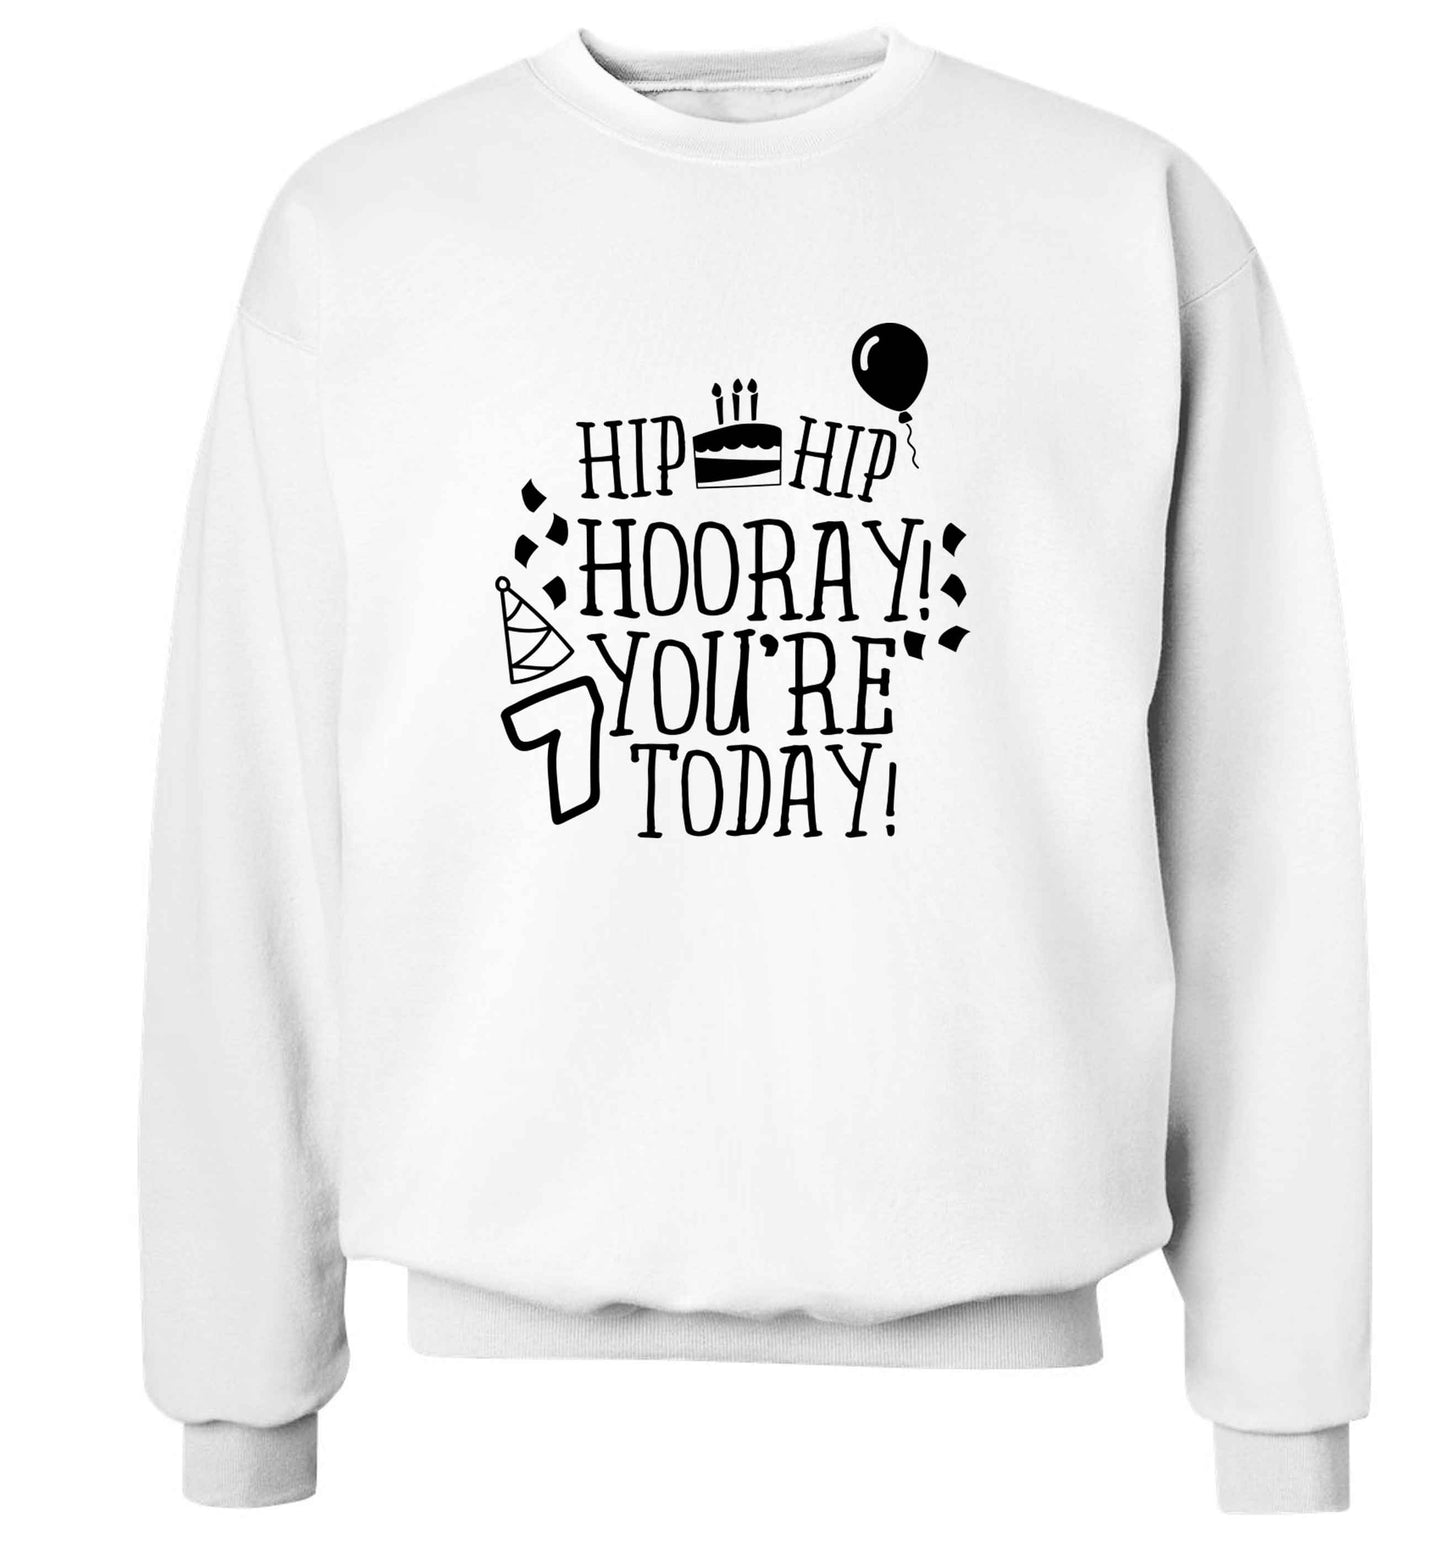 Hip hip hooray you're seven today! adult's unisex white sweater 2XL